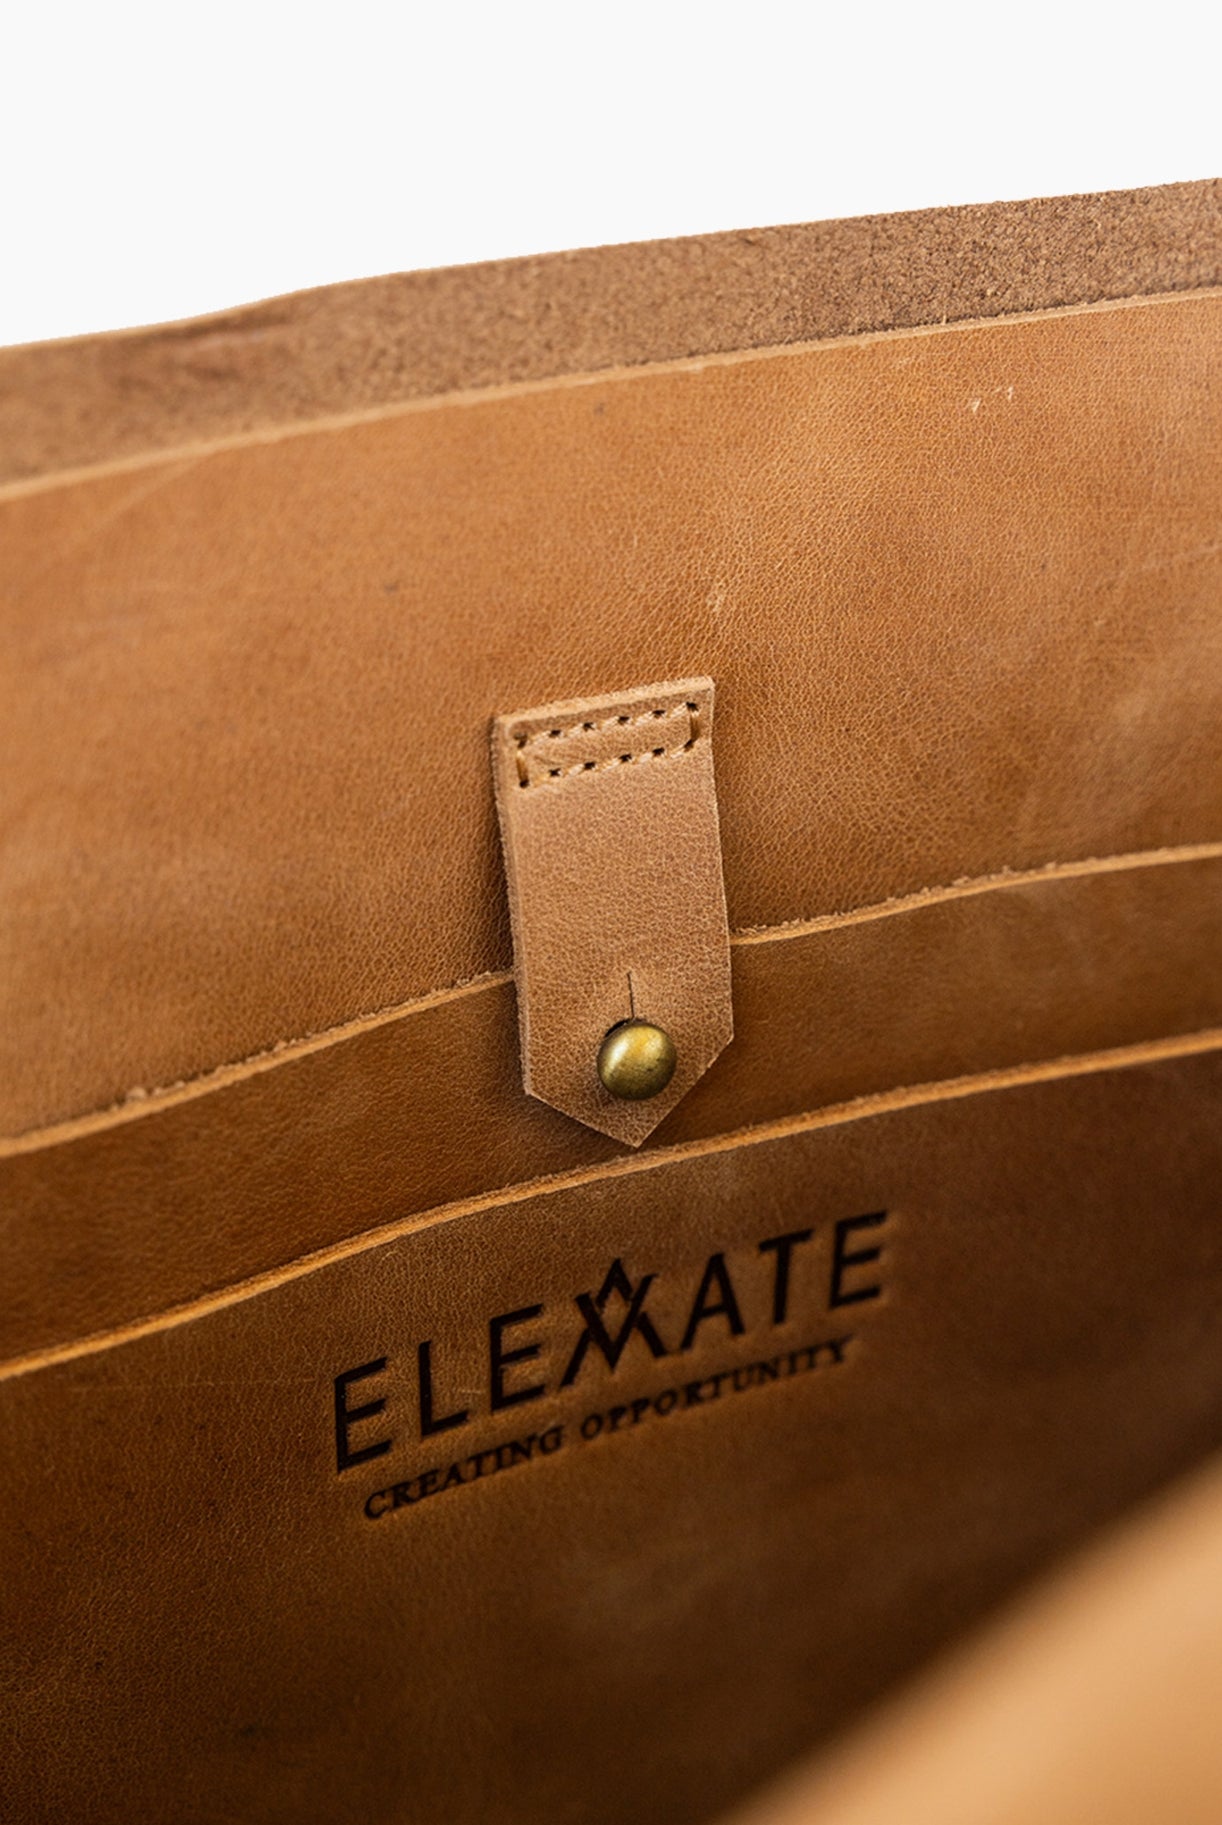 Elevate raw tote black camel Raleigh ethical boutique